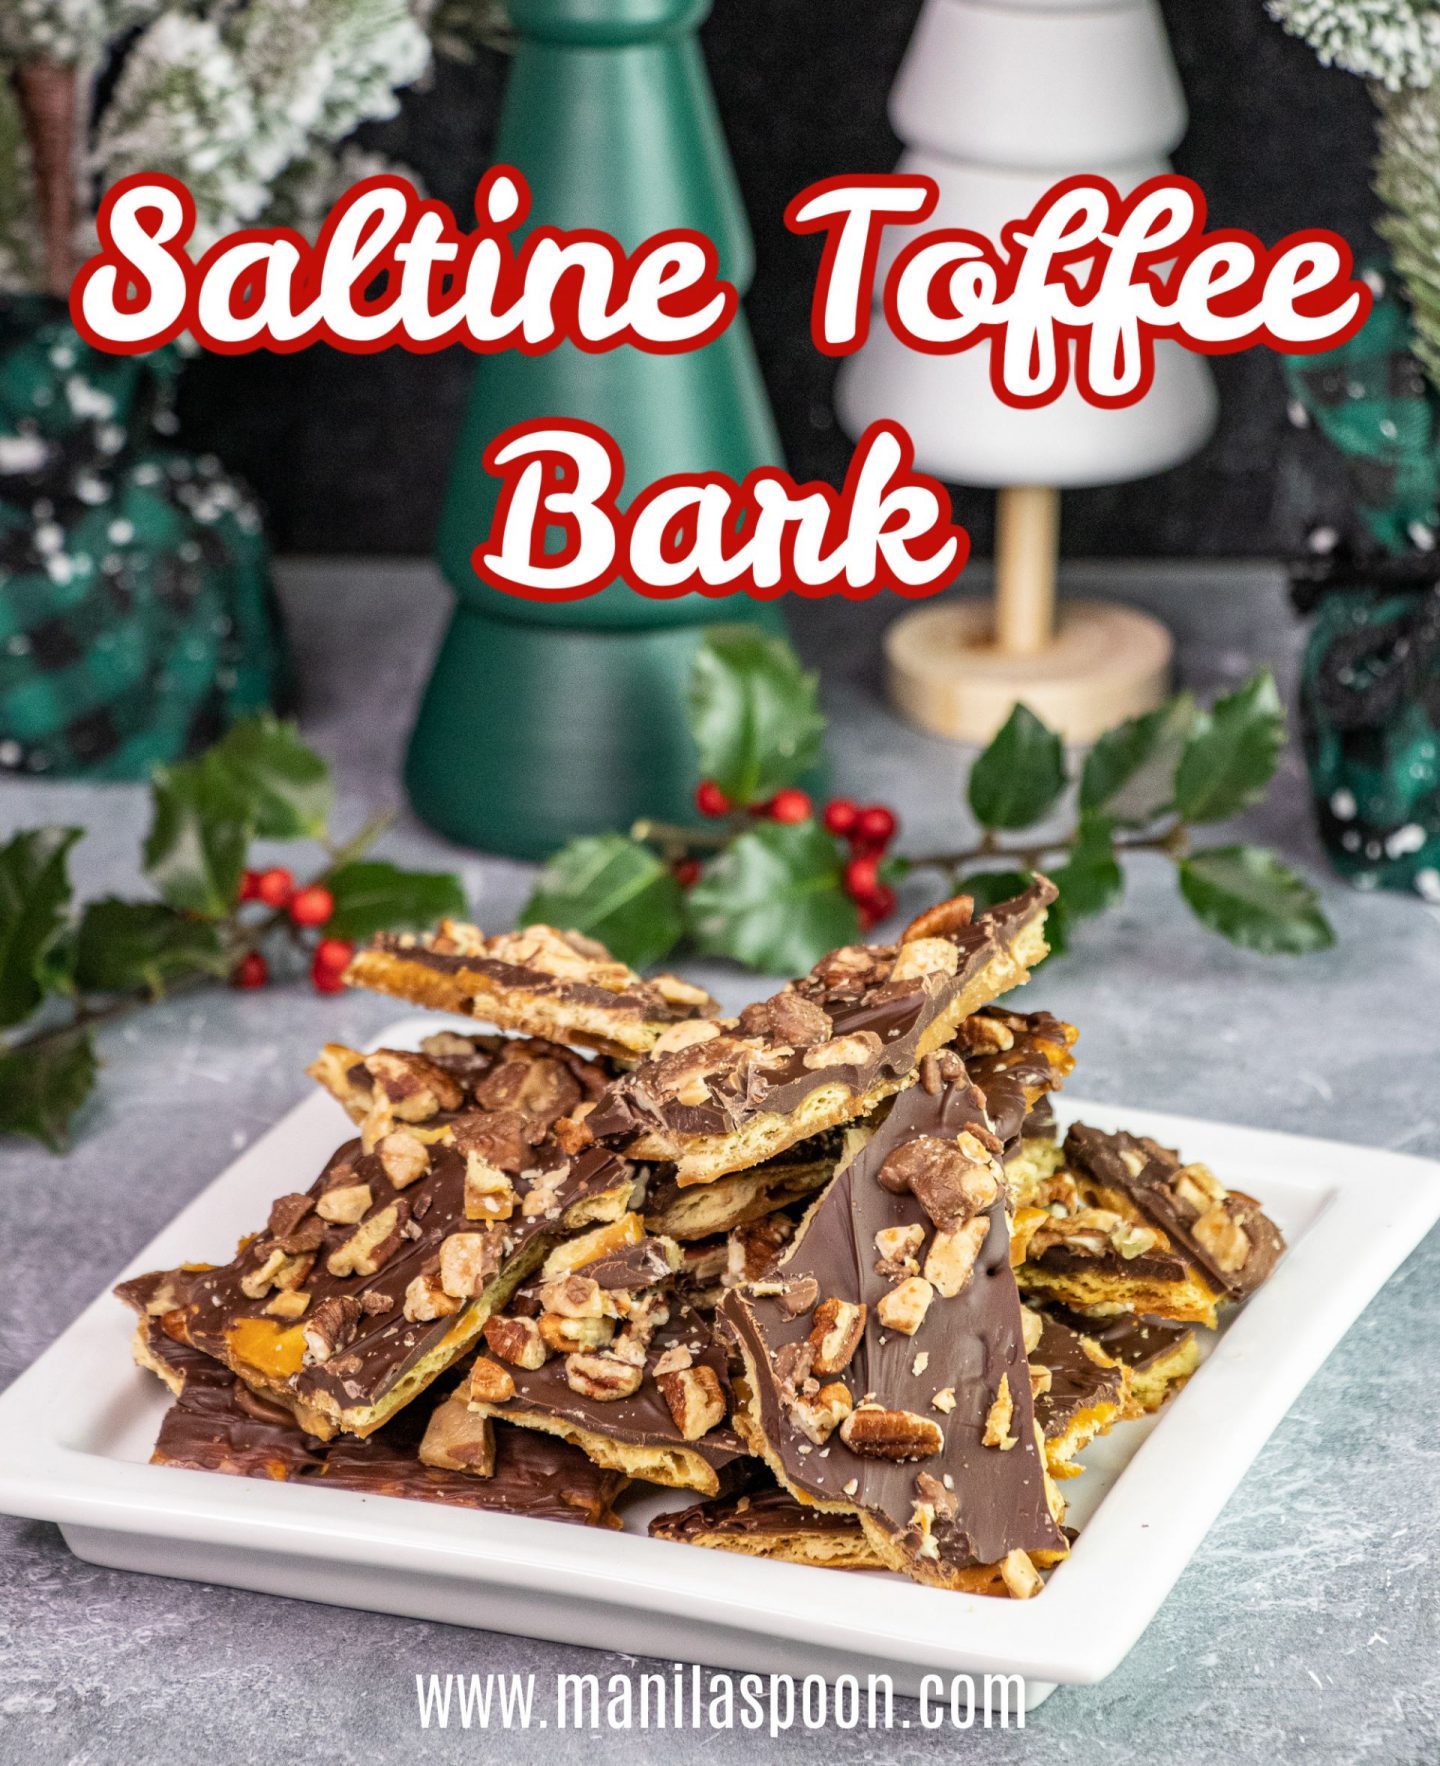 So deliciously addictive (hence the name!), these Saltine Toffee Bark (AKA Christmas Crack) tastes sweet, salty, chocolaty, and just 20 minutes or less to make! It reminds me of brittle candy but oh-so-much-better and so much simpler to make! Perfect as a holiday gift!